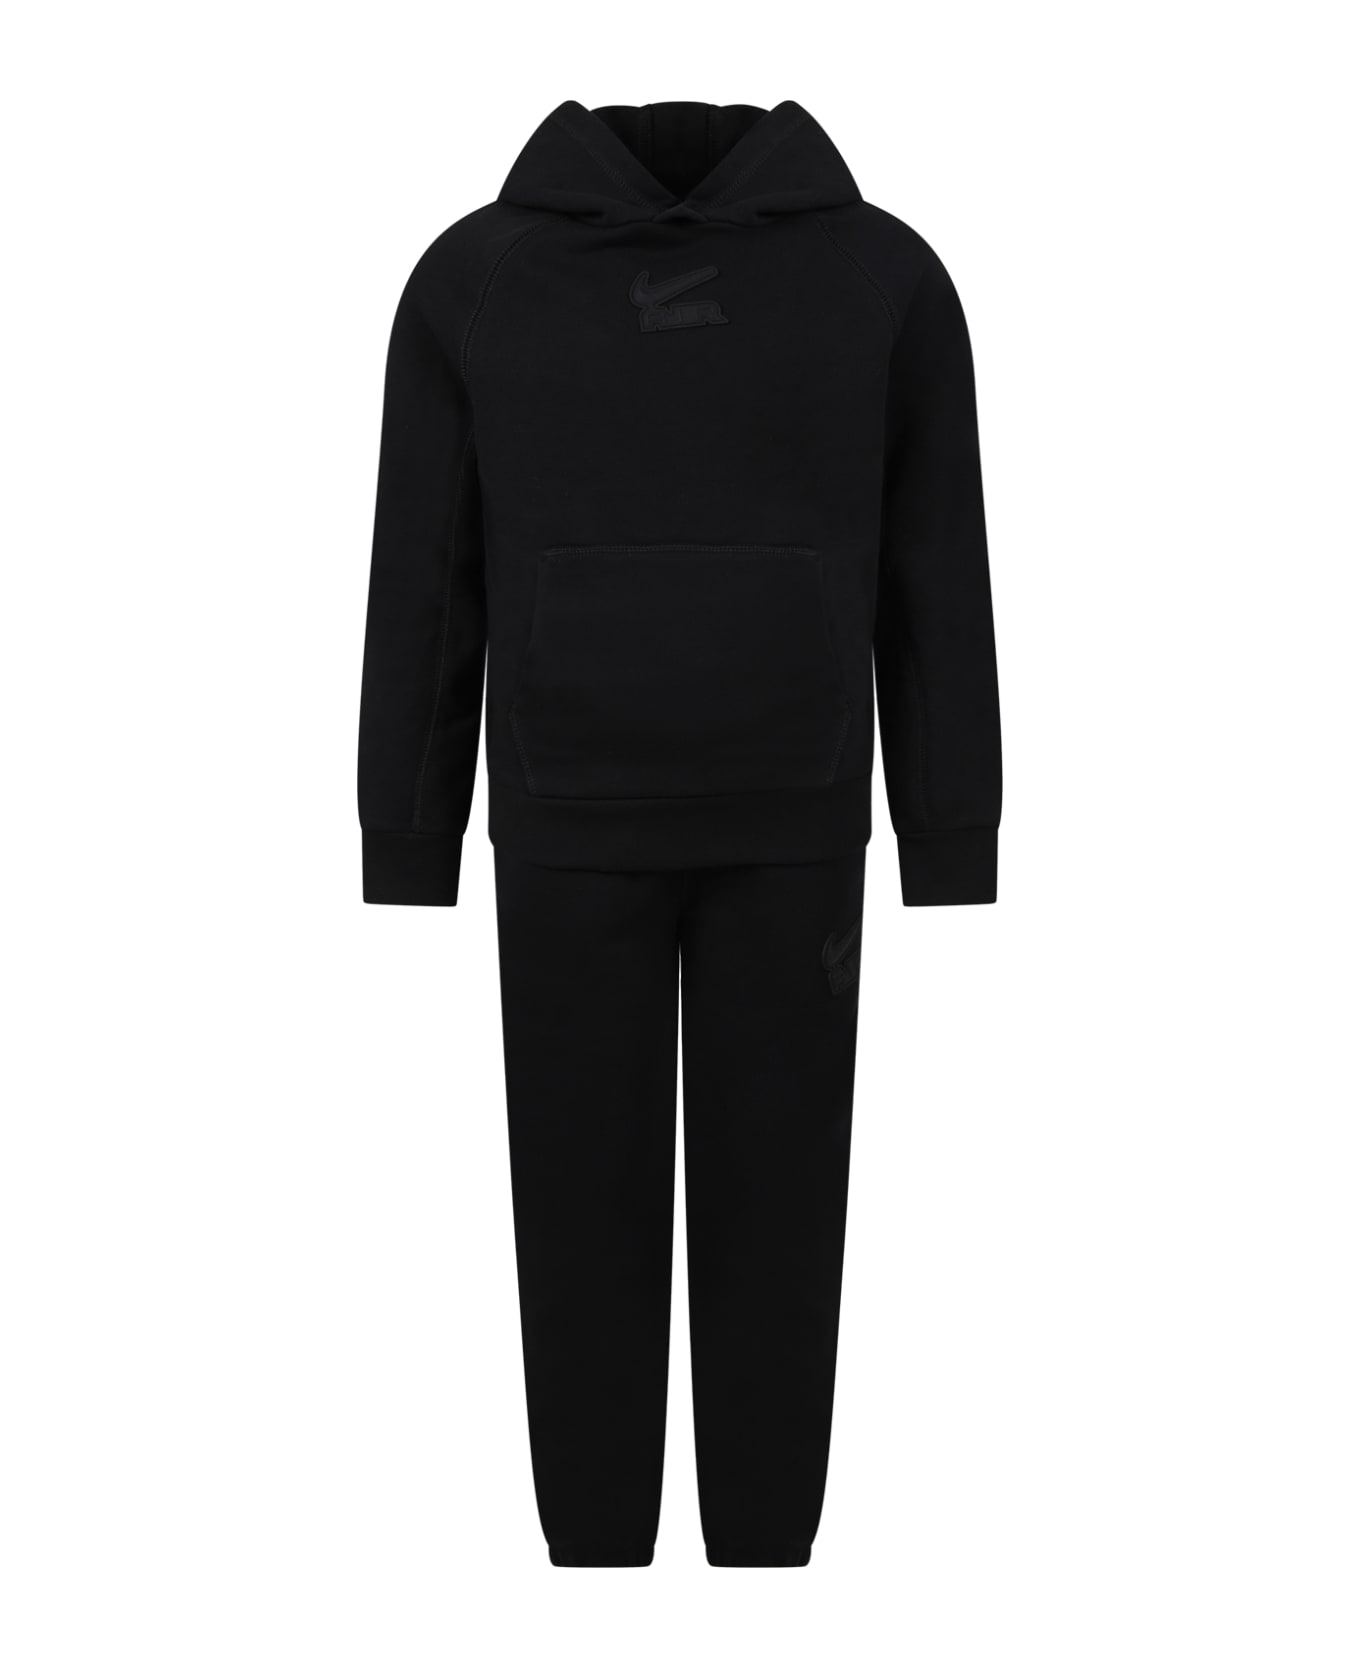 Nike Black Suit For Boy With Logo - Black